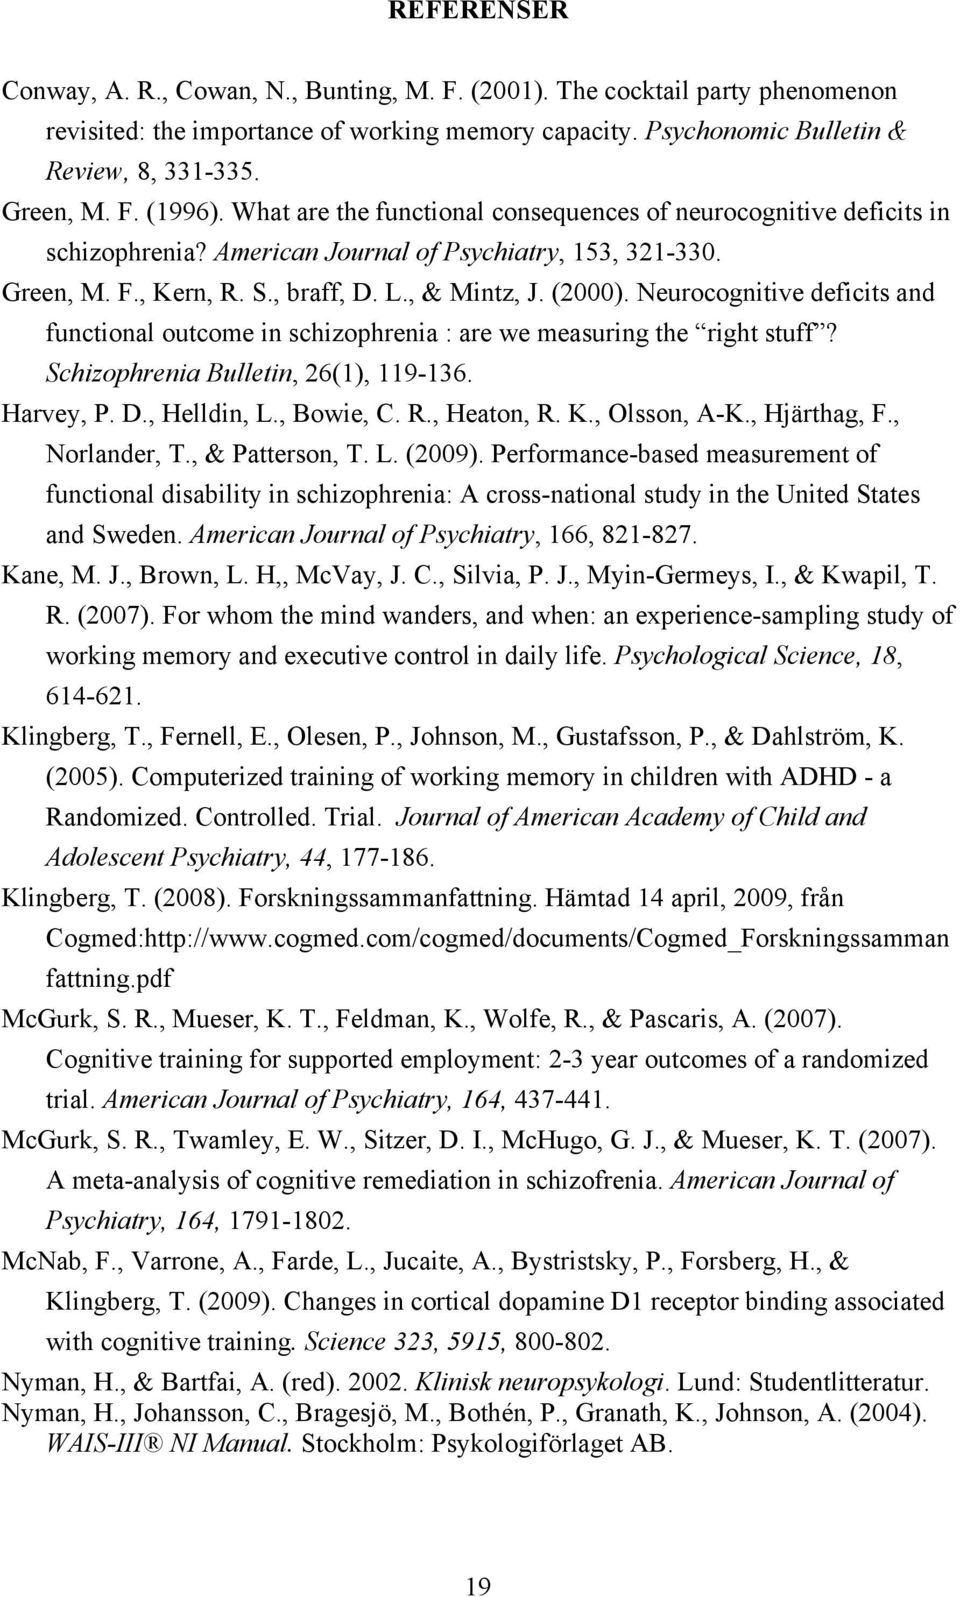 Neurocognitive deficits and functional outcome in schizophrenia : are we measuring the right stuff? Schizophrenia Bulletin, 26(1), 119-136. Harvey, P. D., Helldin, L., Bowie, C. R., Heaton, R. K.